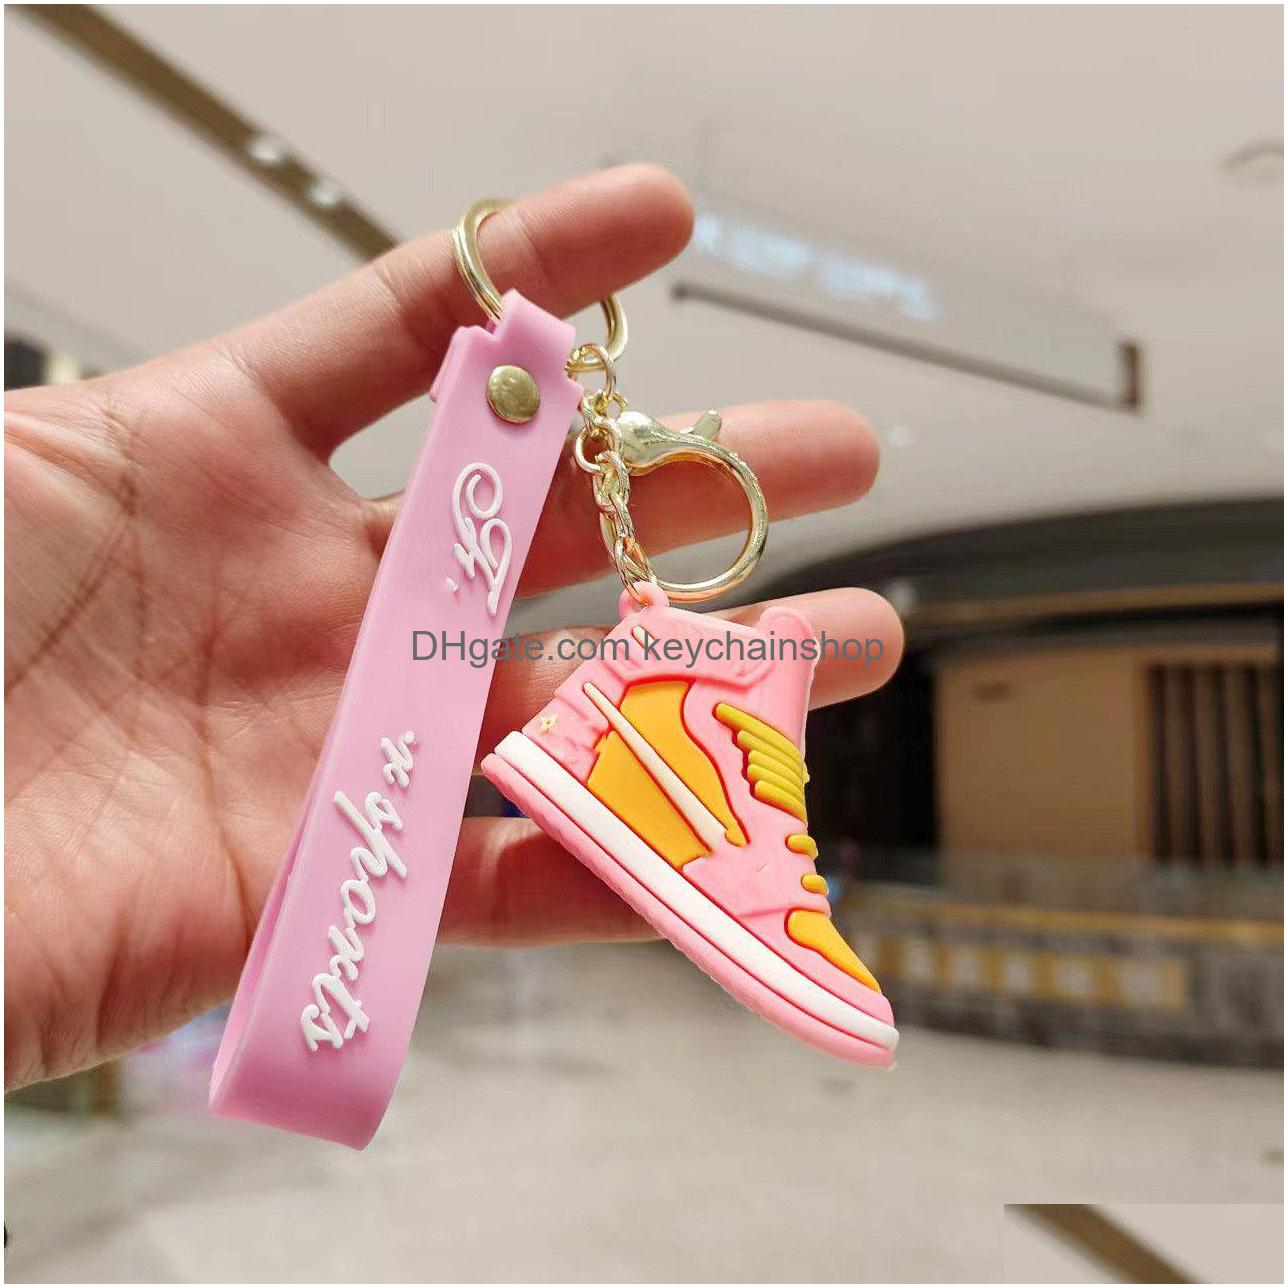 

Keychains Lanyards 5 Styles Designer Sneaker Keychain Party Gift Mini Stereoscopic Shoe Pendant Bag Key Ring Accessory Drop Delive Dhfw4